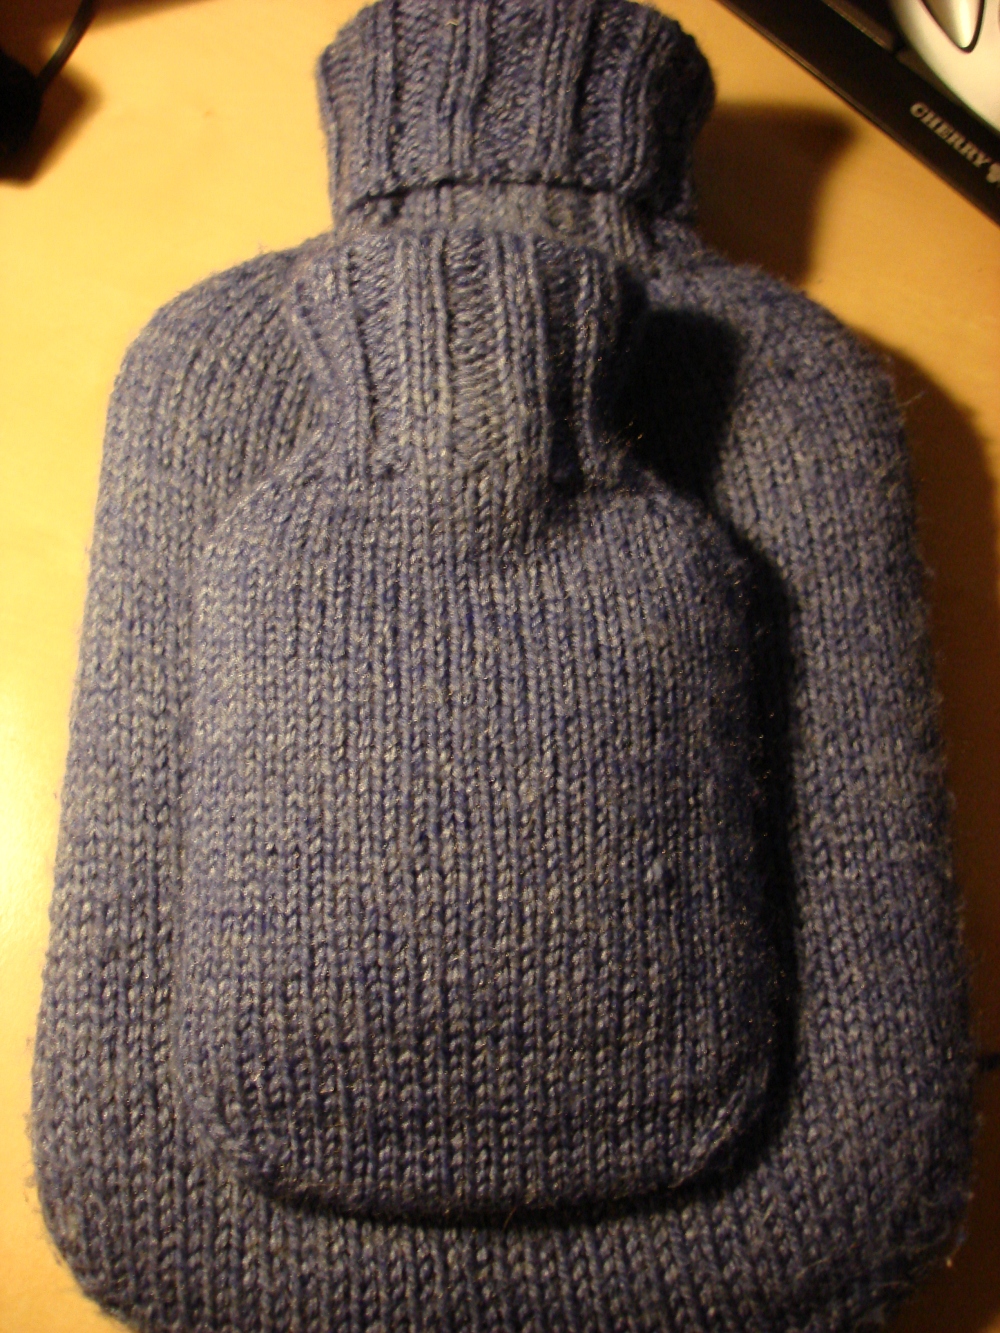 hot water bottles with knitted covers